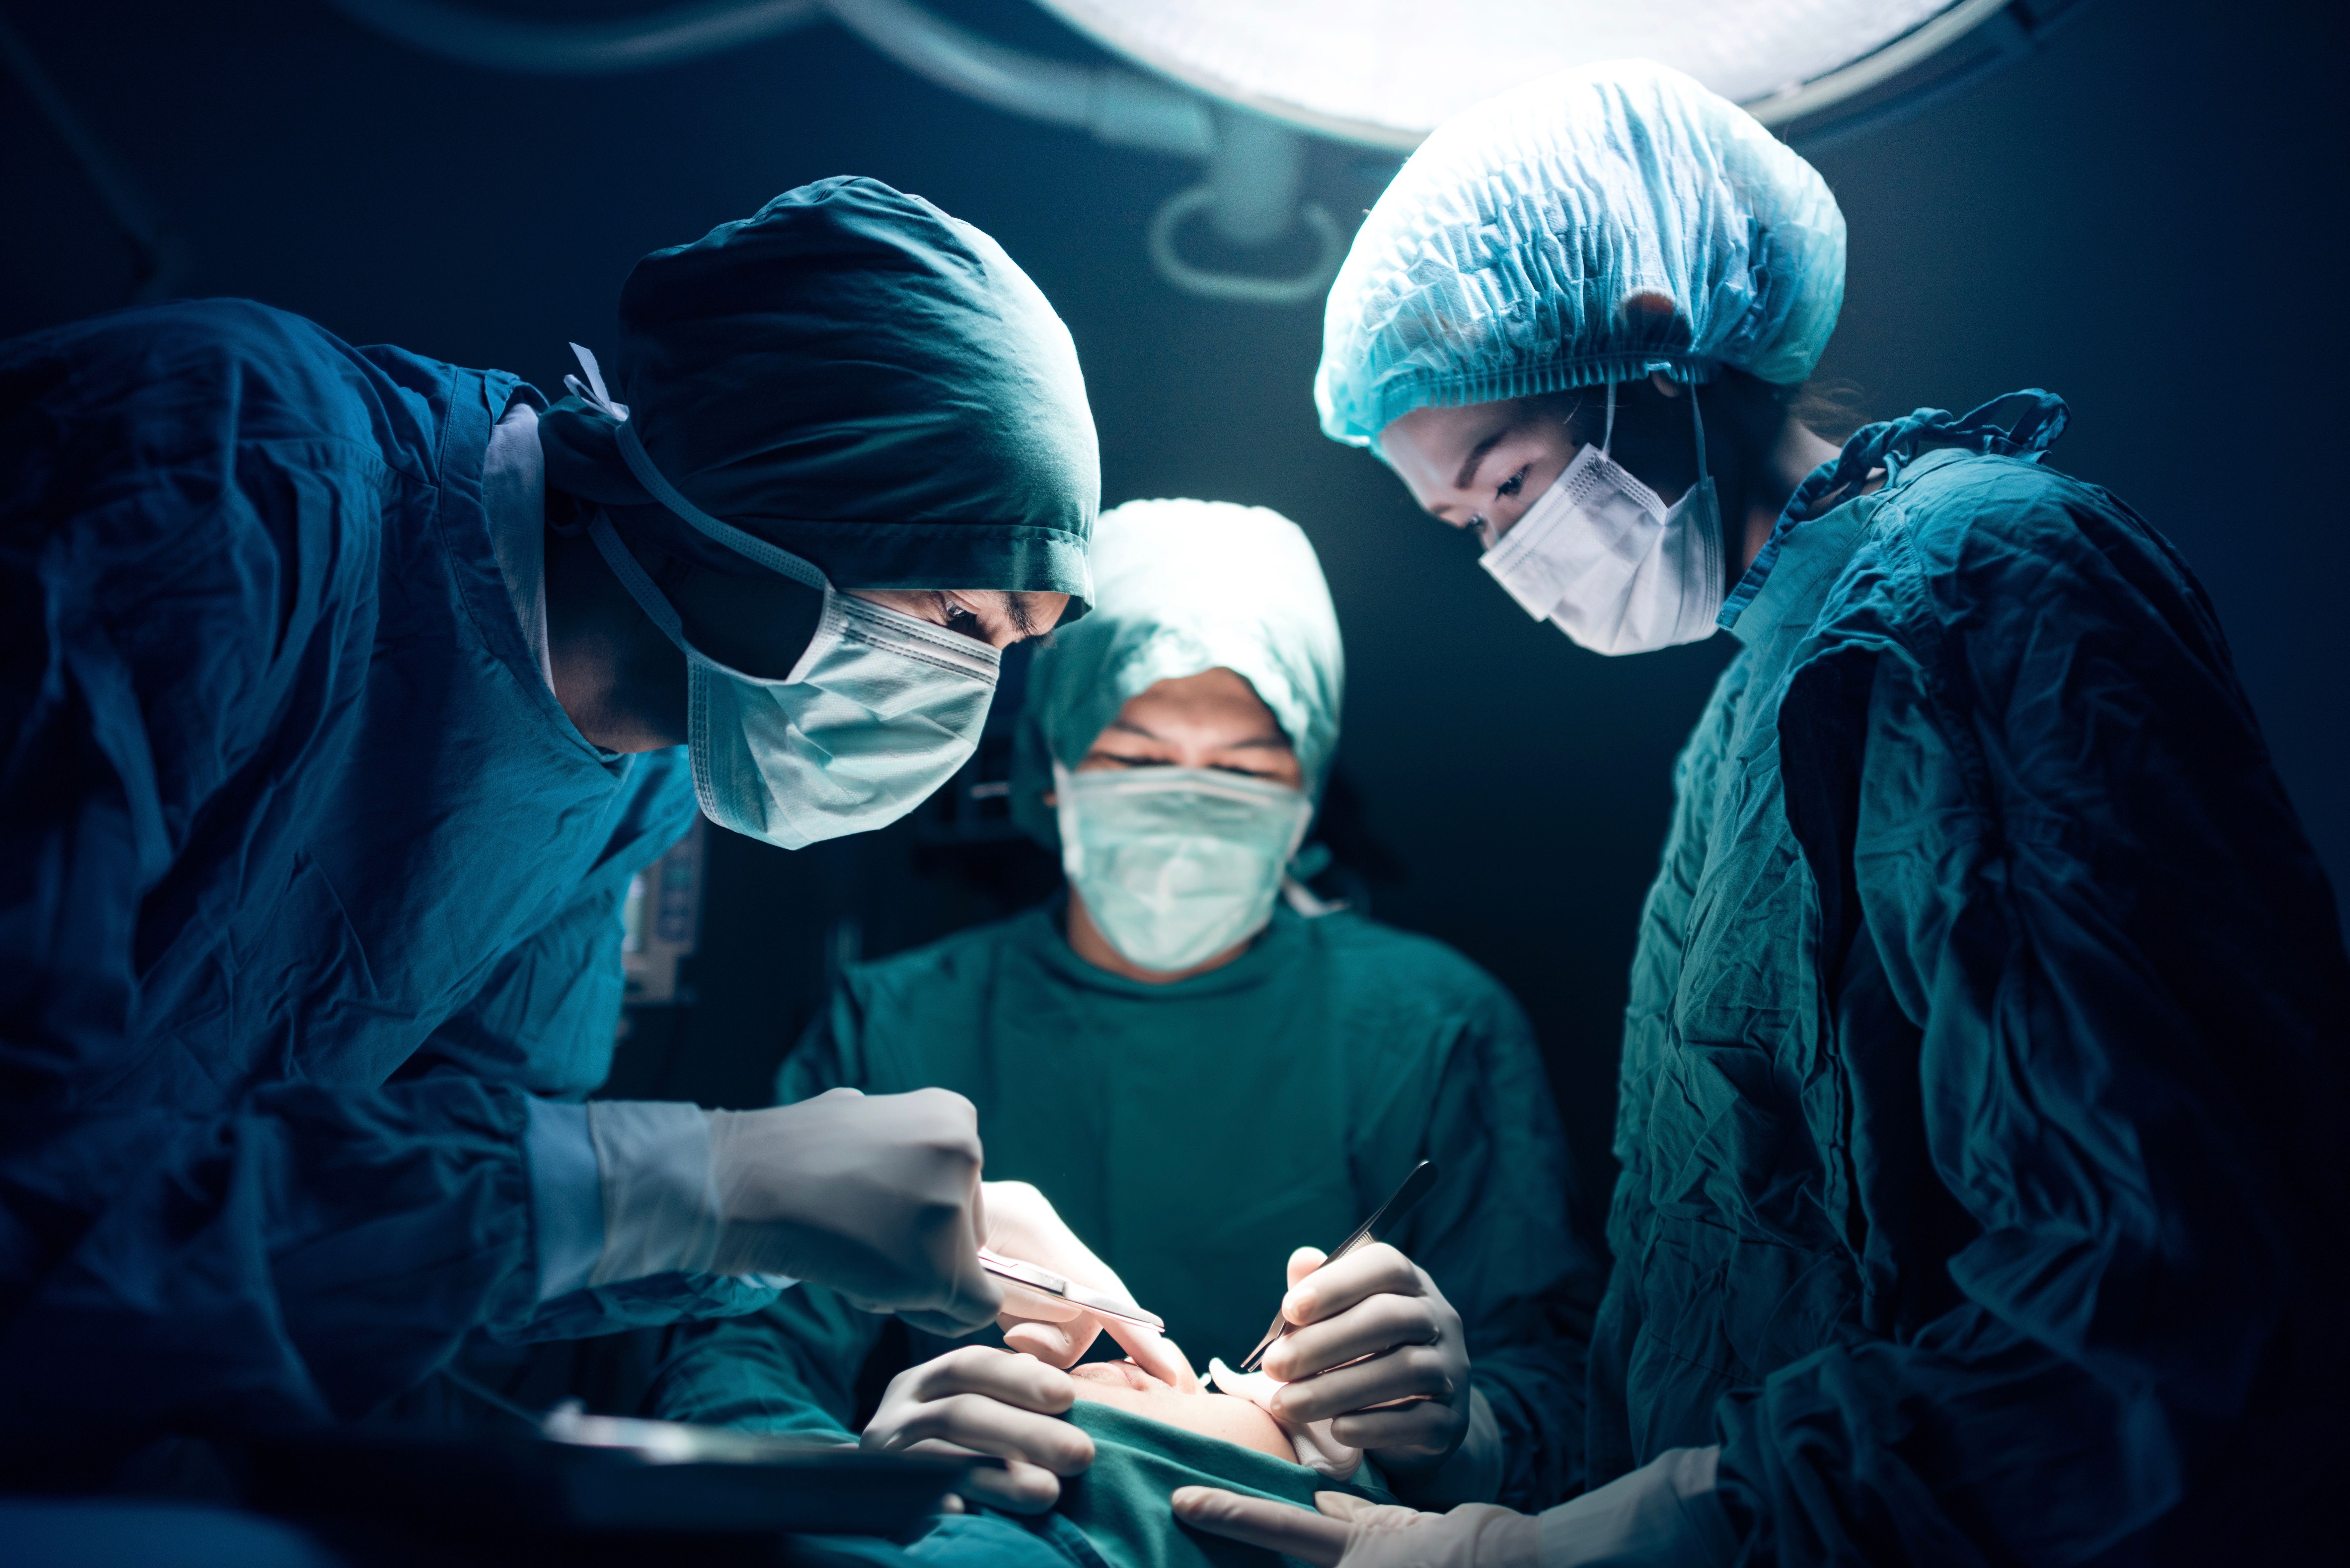 Surgical team working on a patient in operating theater.